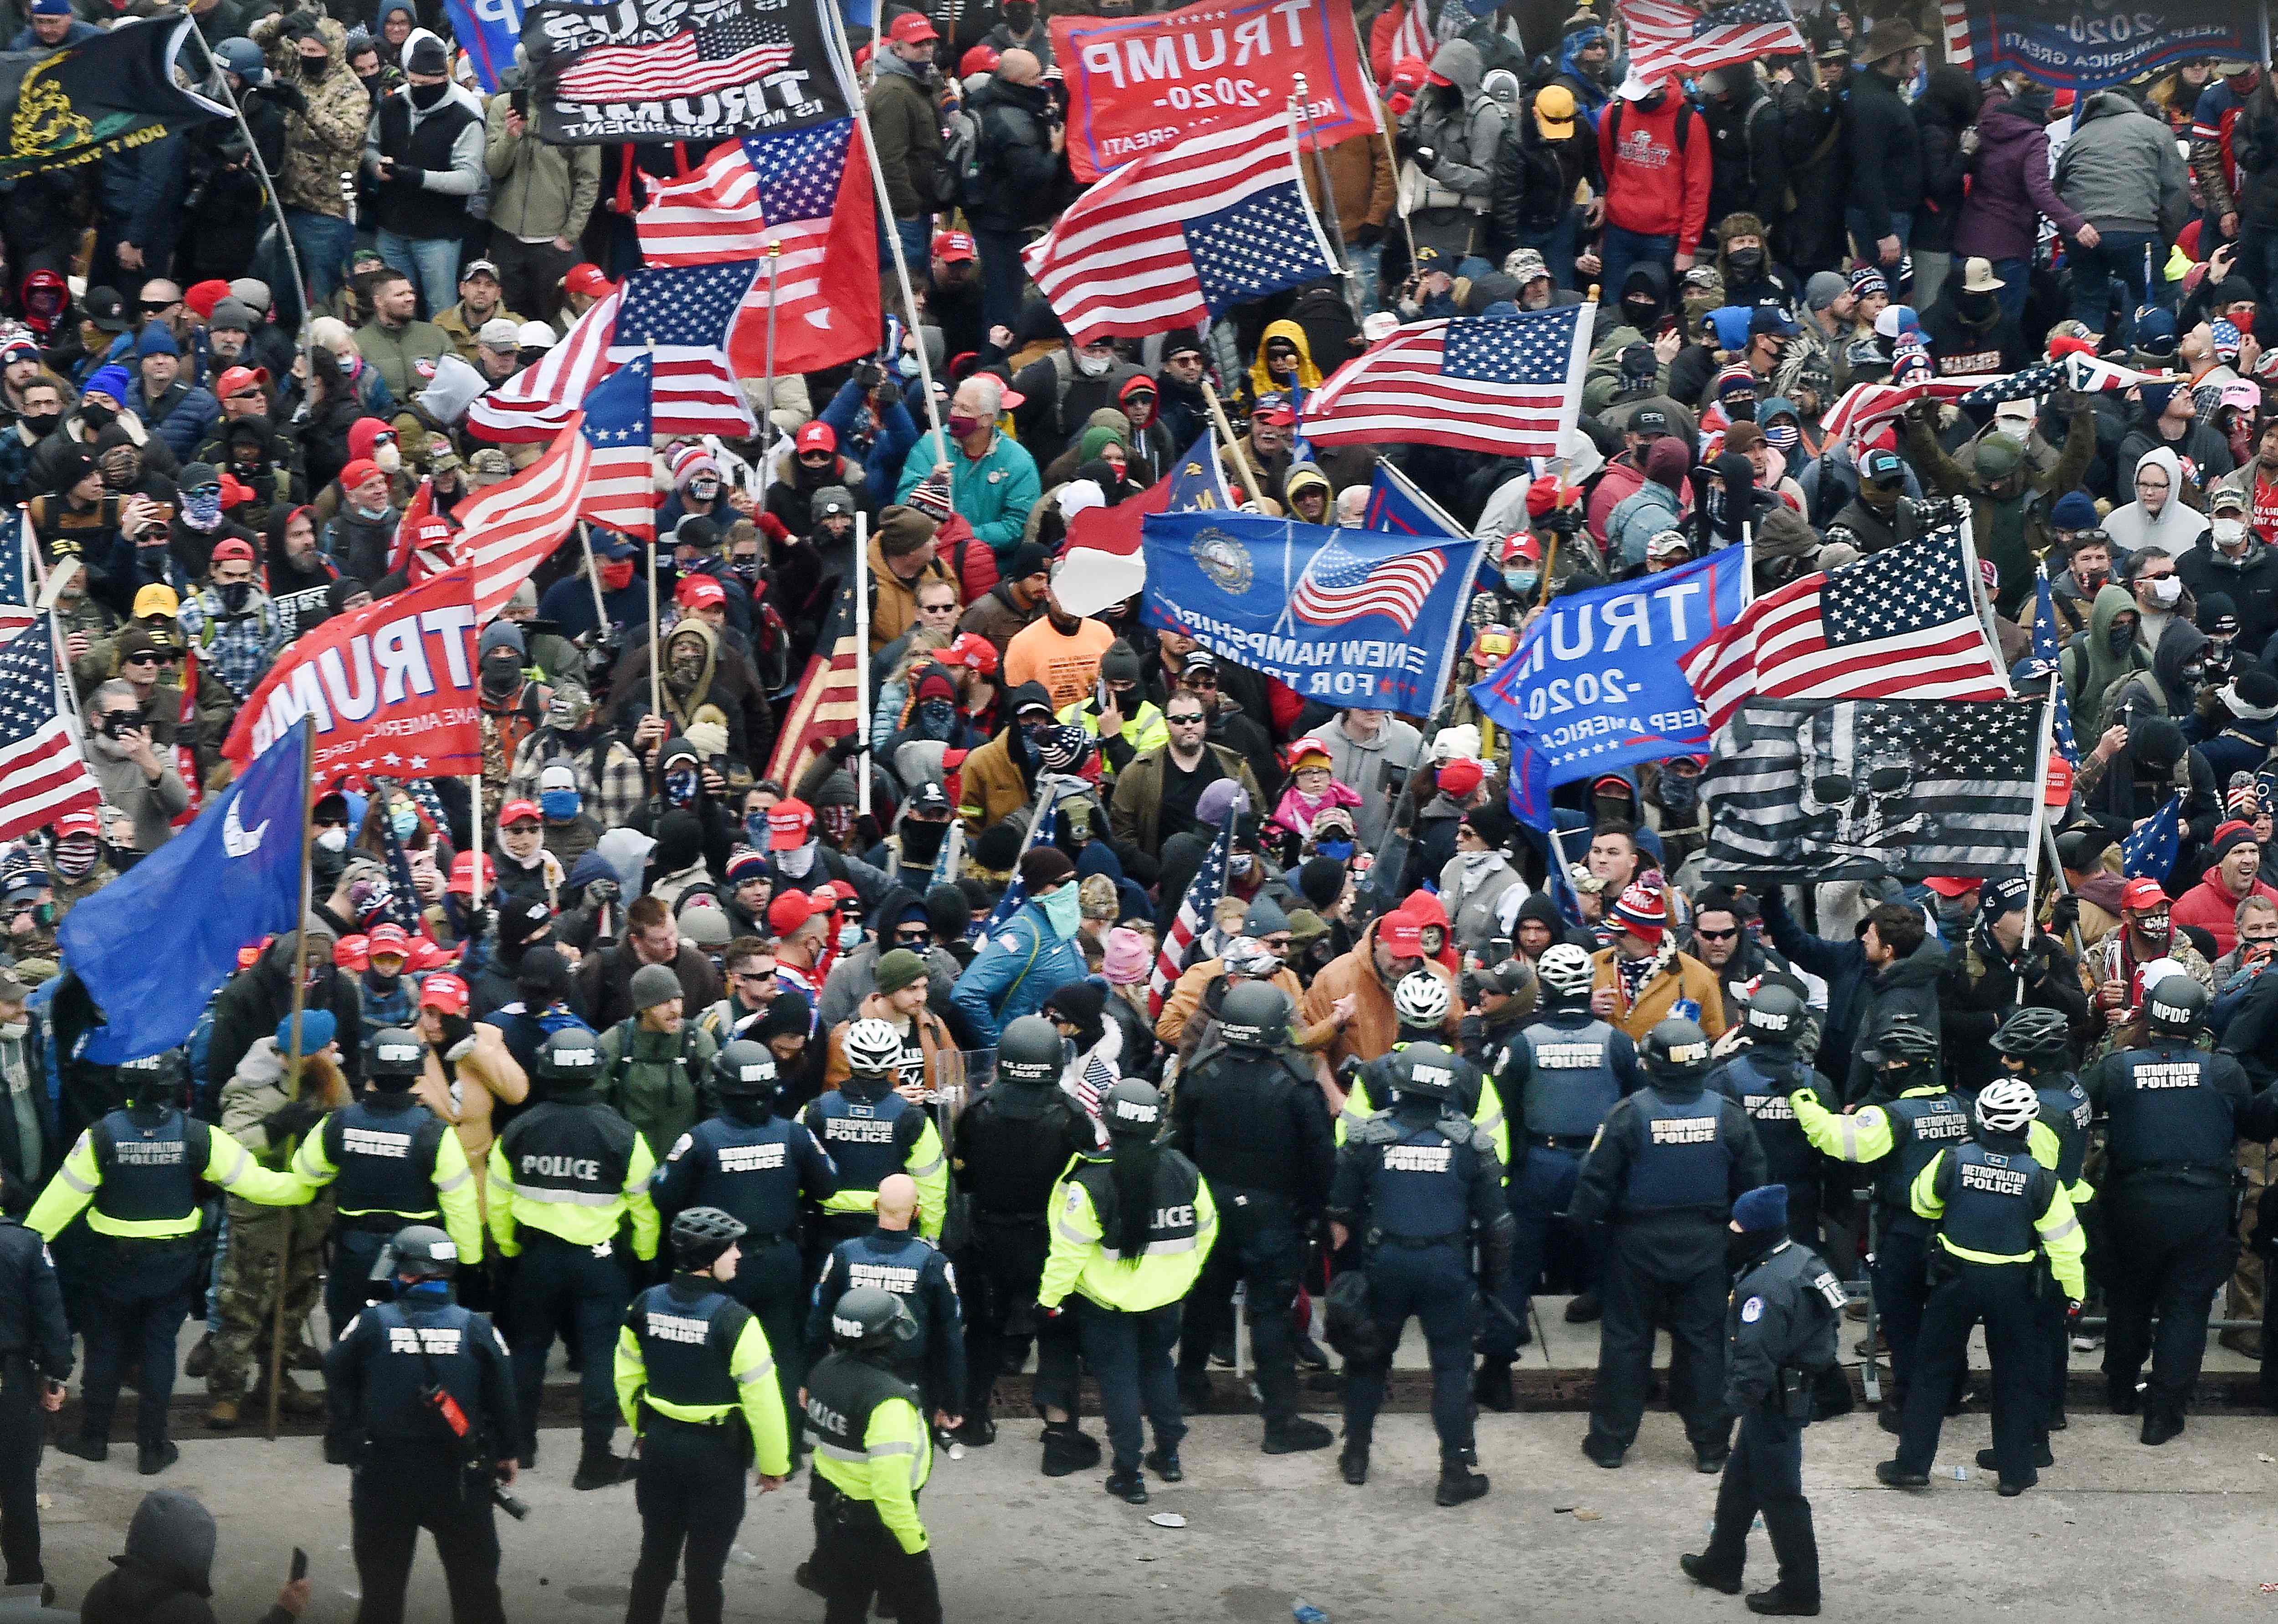 Trump supporters clash with police and security forces as they storm the US Capitol in Washington, DC